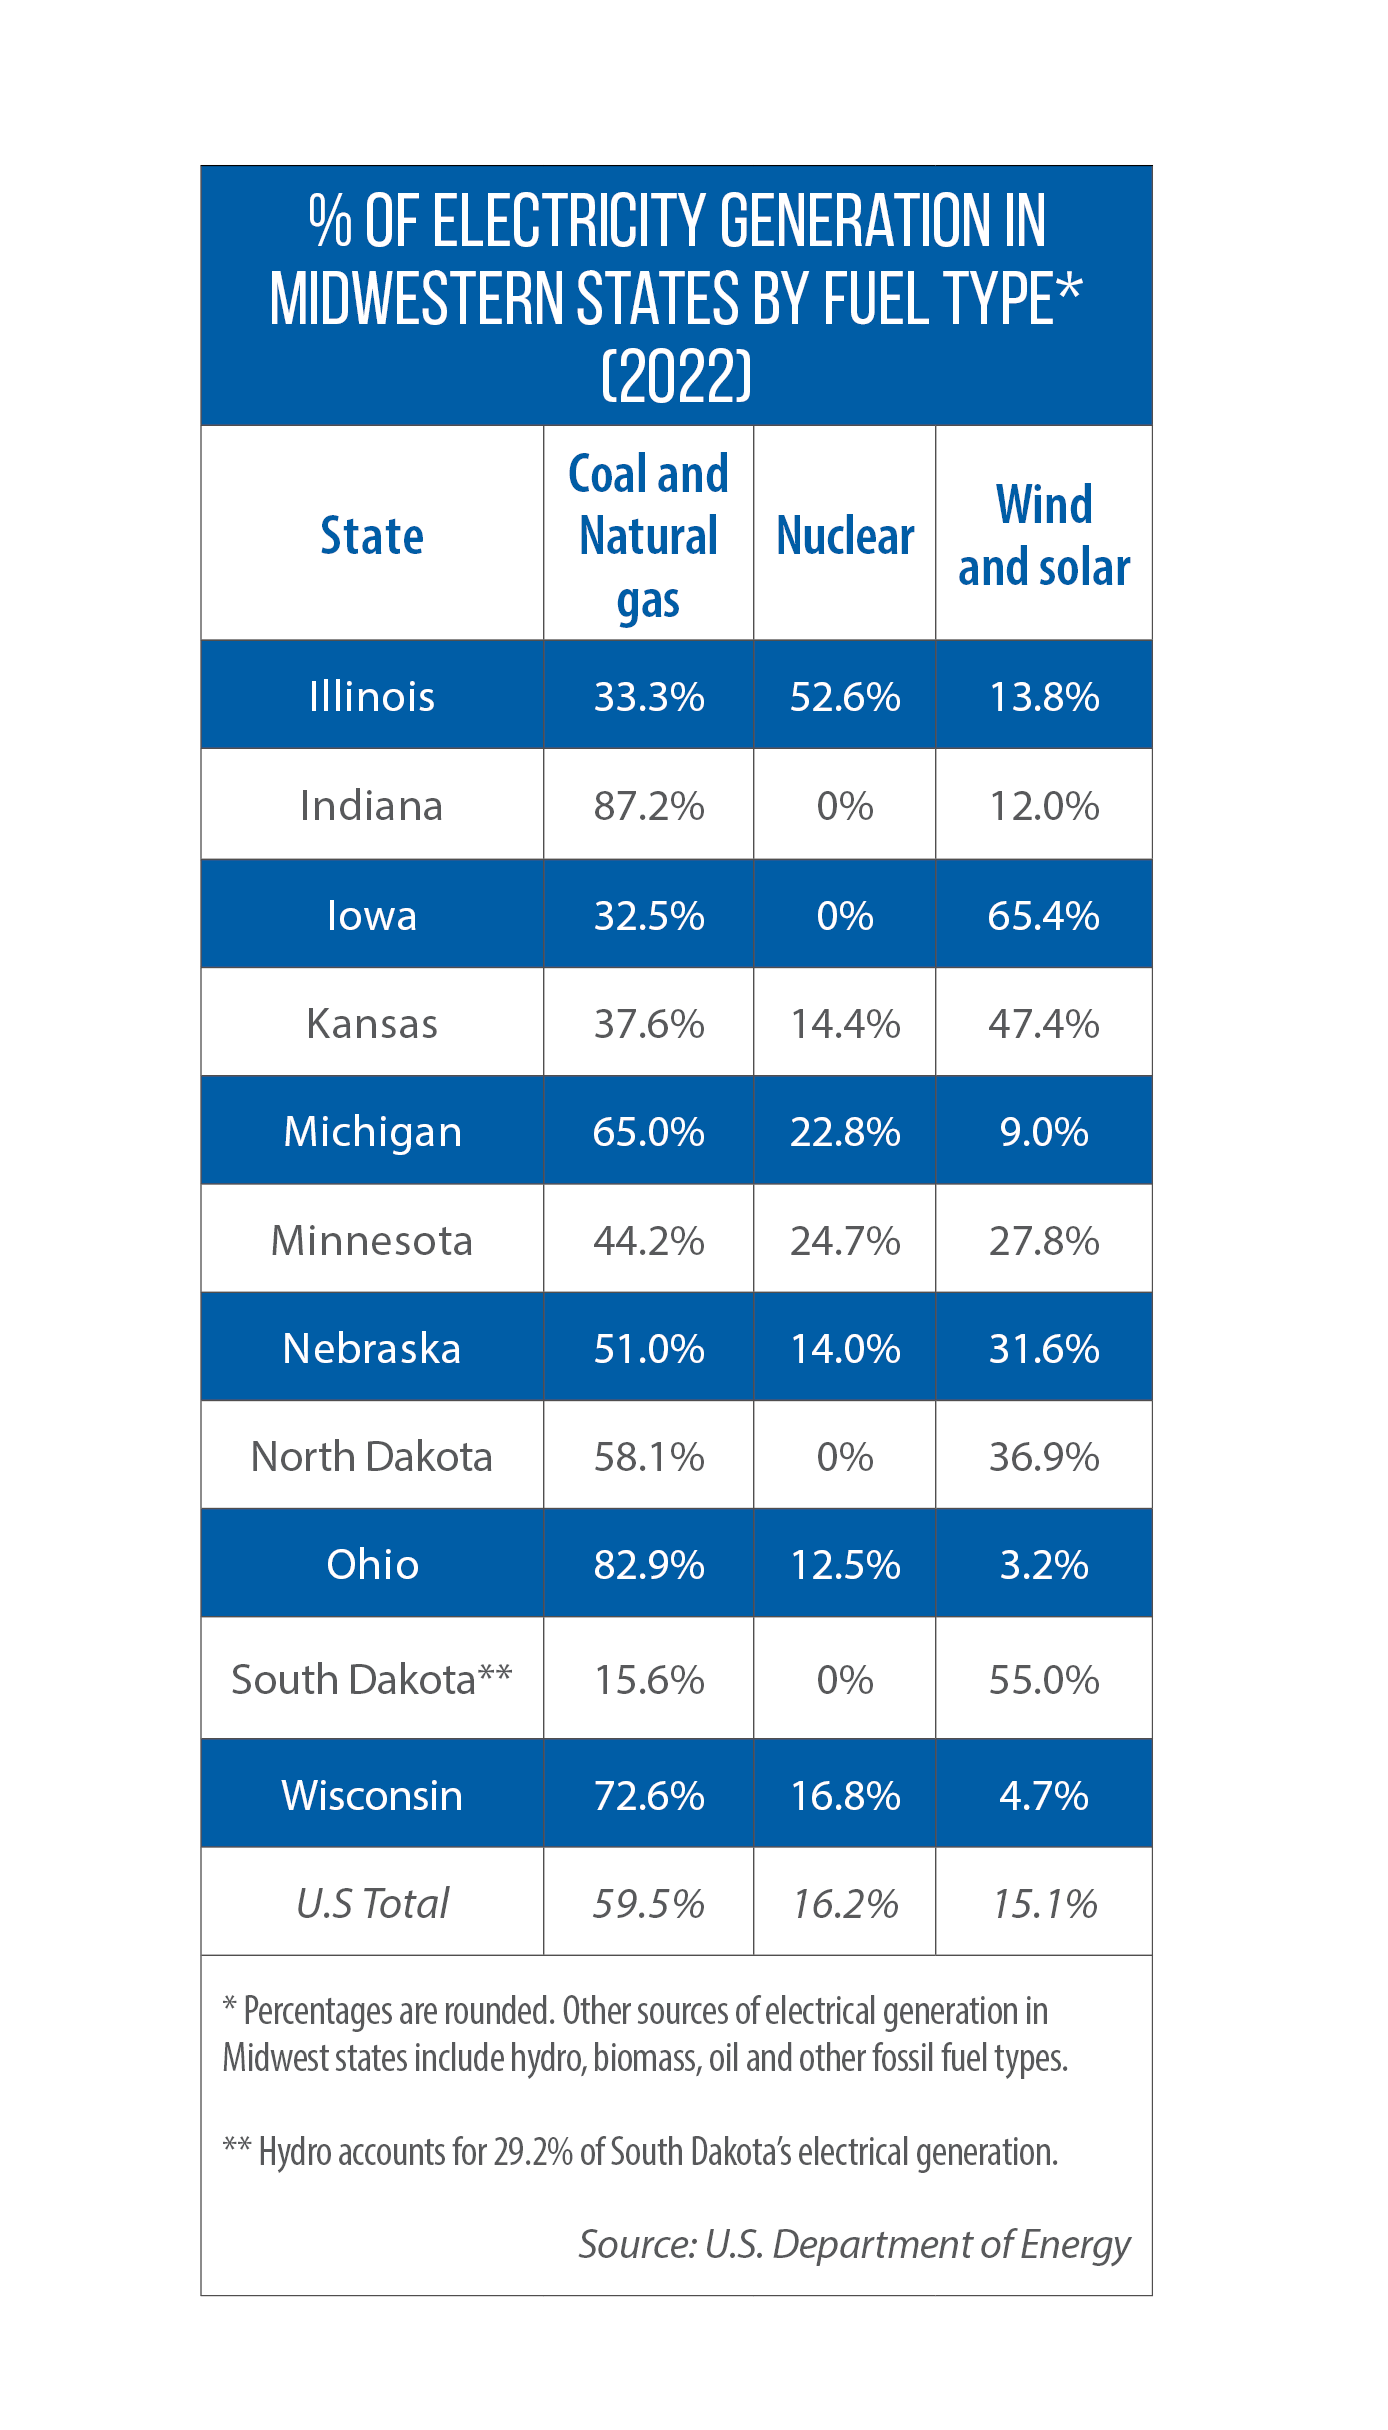 Table of electricity generation by fuel type in Midwestern states for 2022